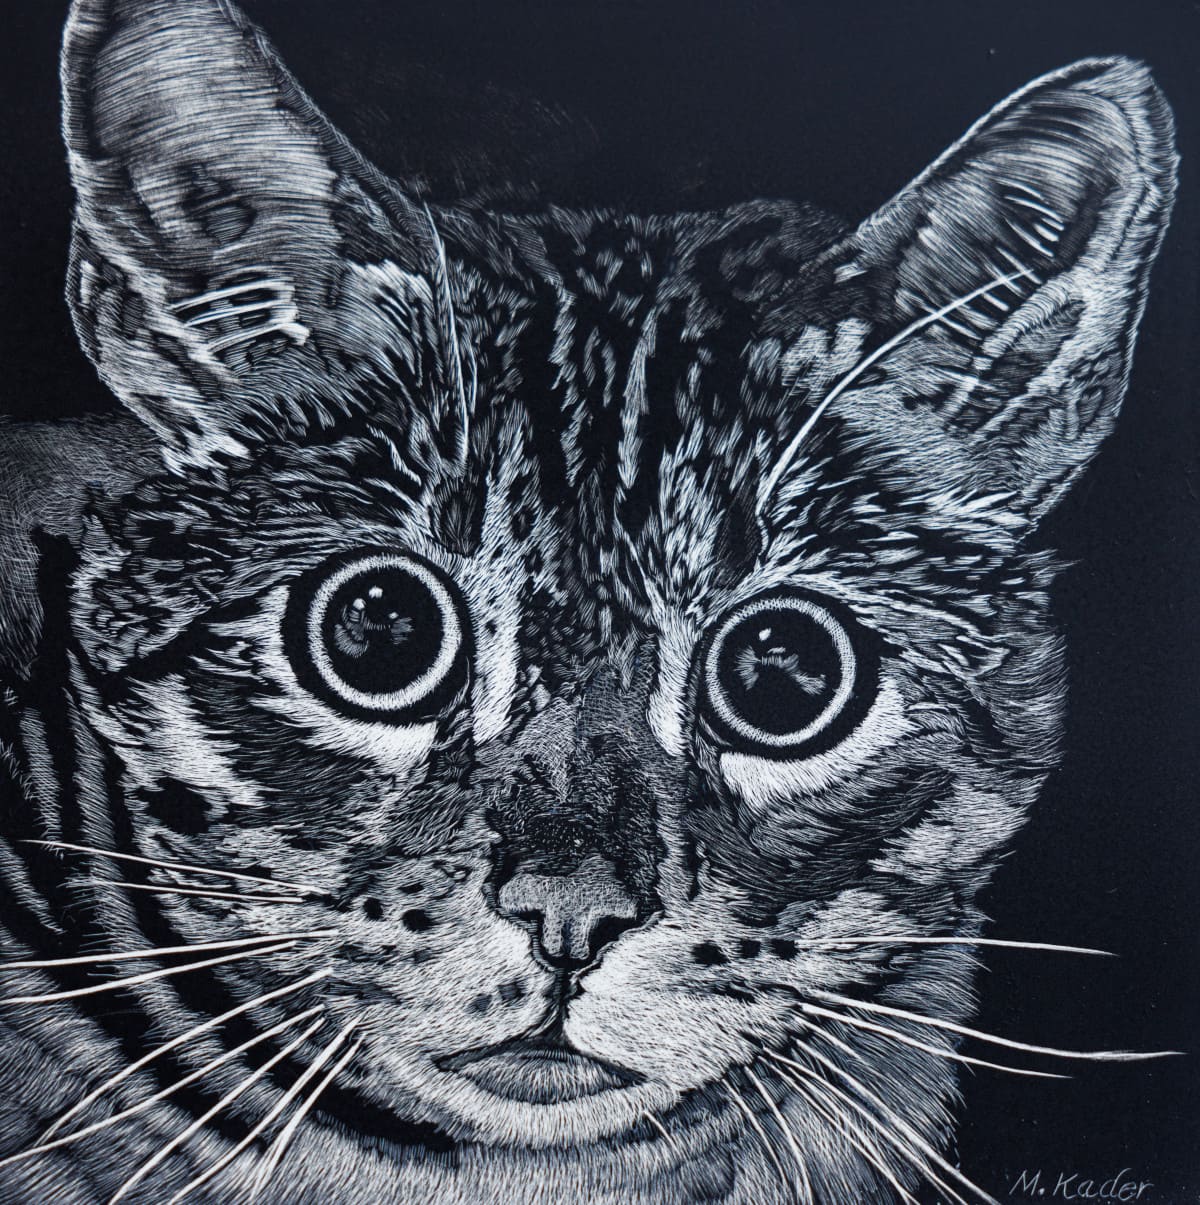 Whiskers 5”x5” Available